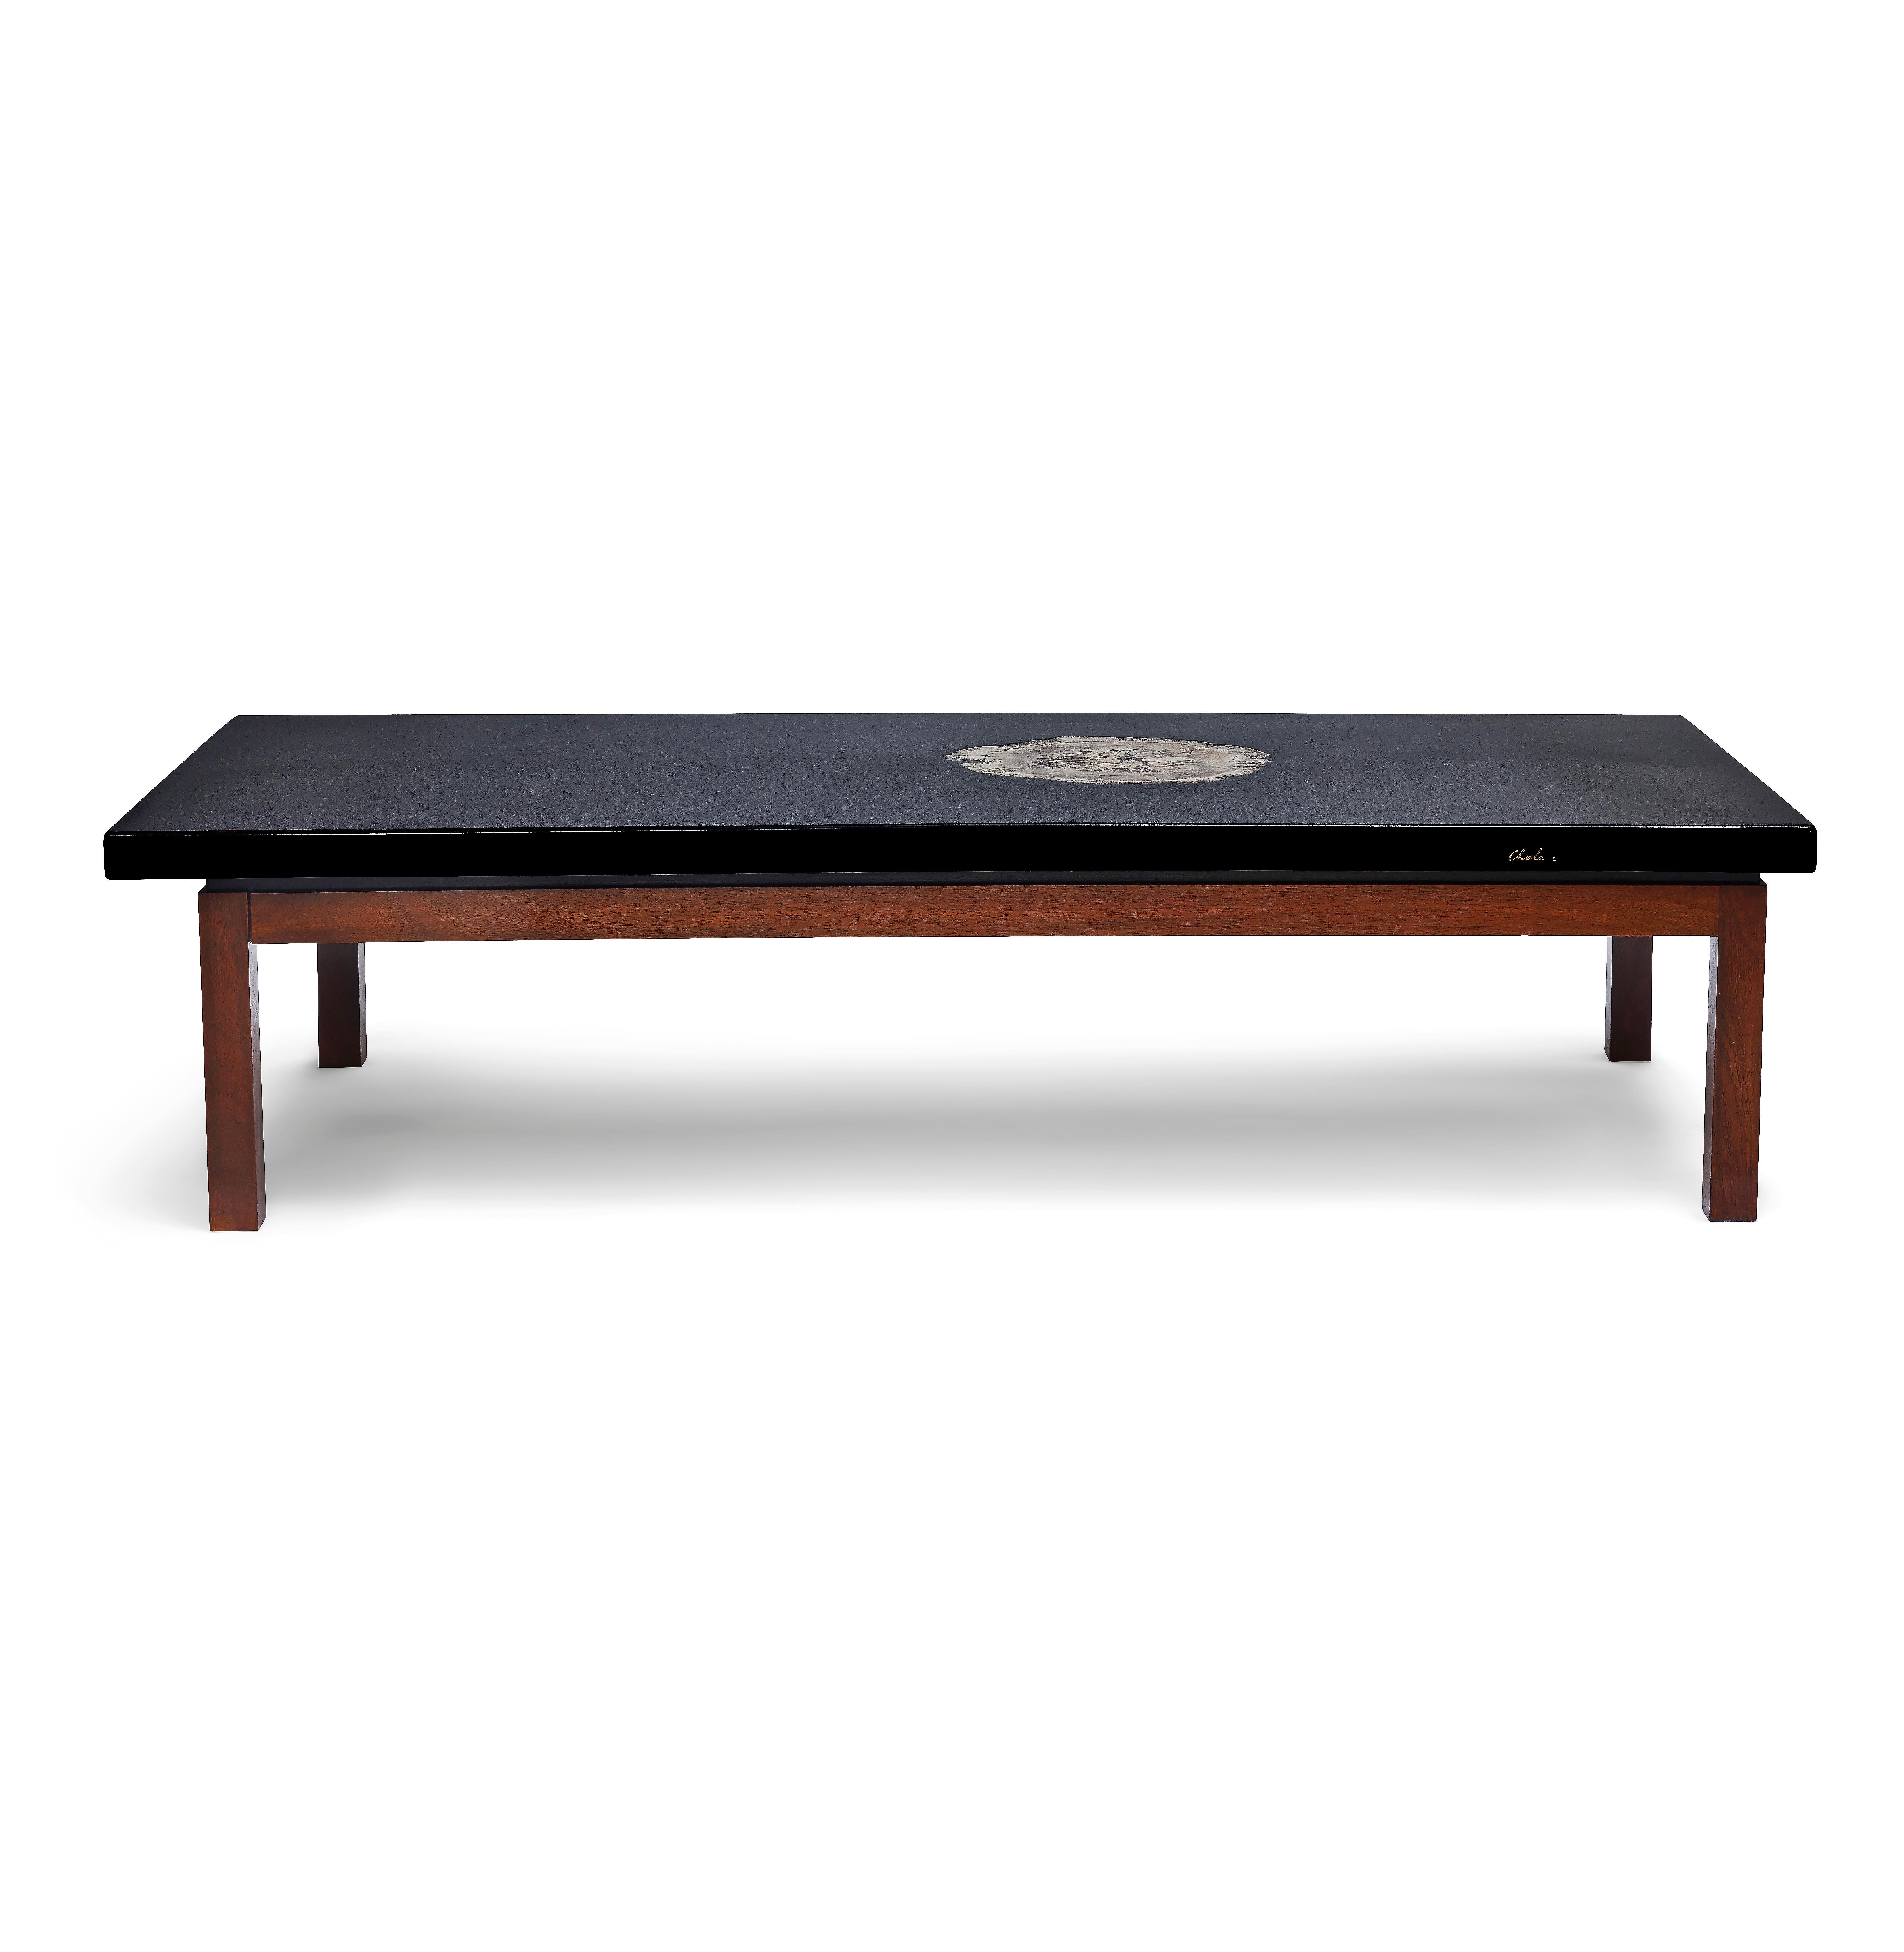 Black resin coffee table sitting on a wooden base with inset agate, designed by Ado Chale. Signed 'Chale' to the front with a ruby.
Ado Chale is a celebrated Belgian artist and designer known for his exquisite inlays in petrified wood, minerals or